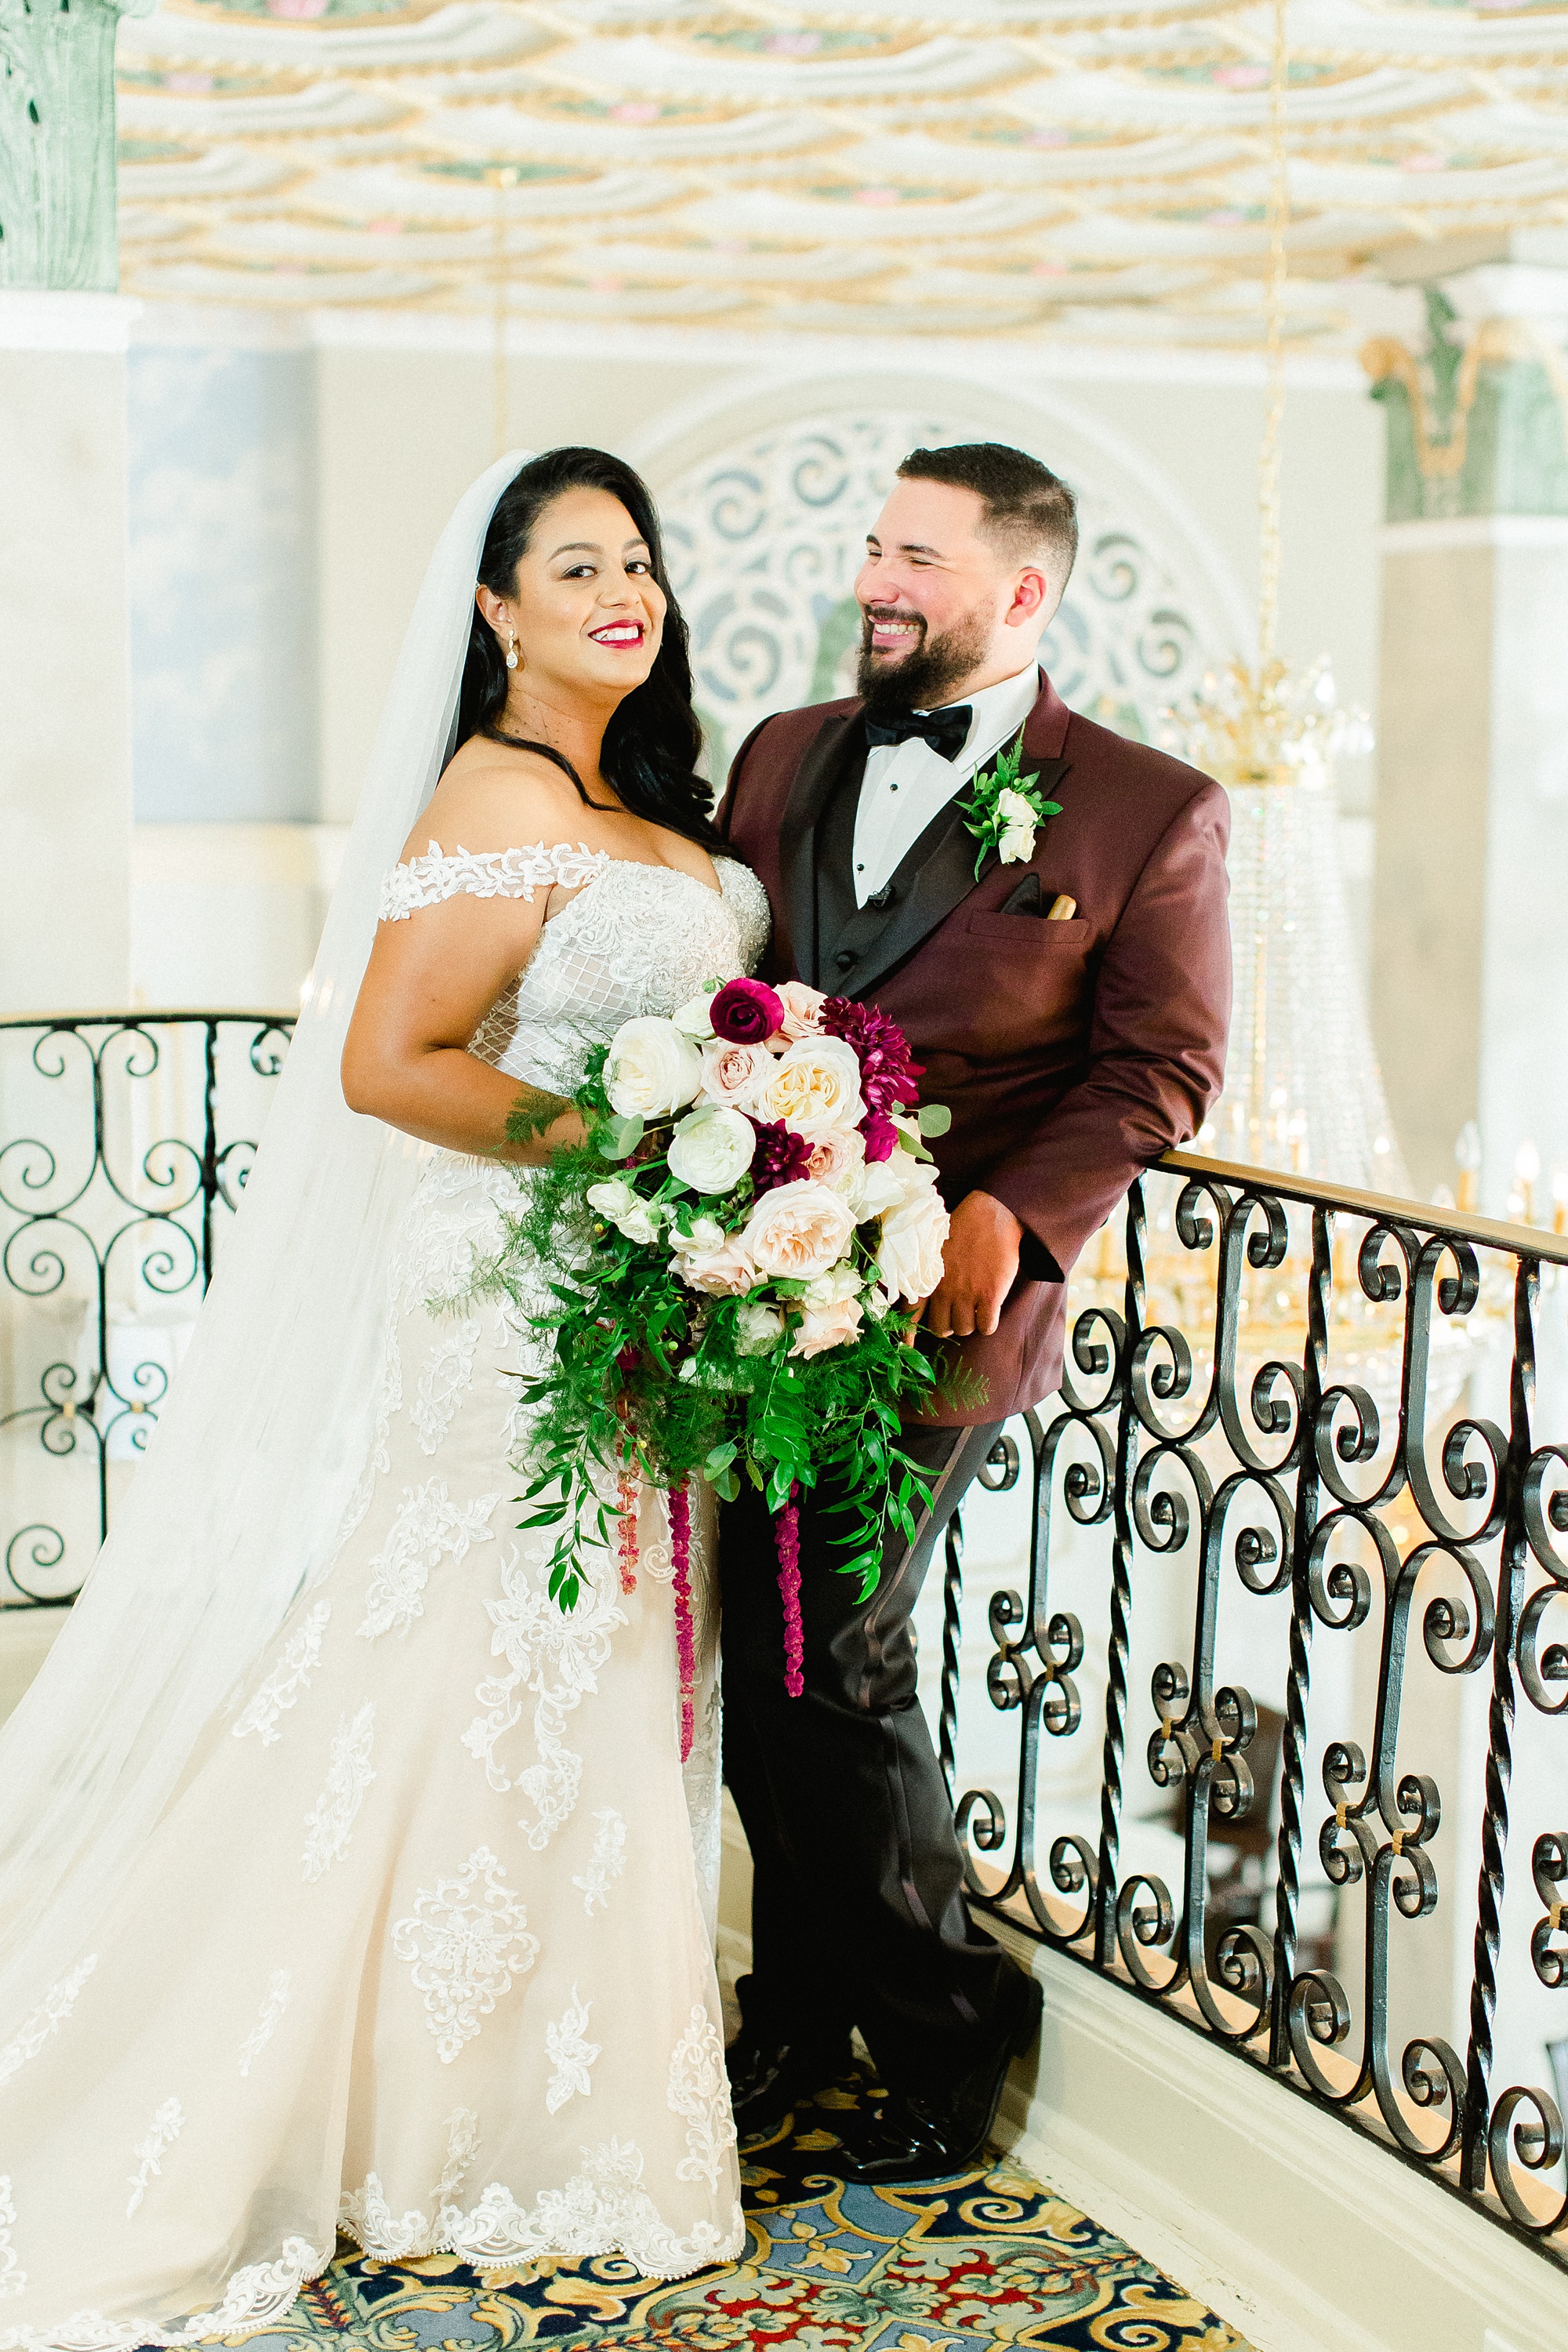 Tampa Wedding Photographer | © Ailyn La Torre Photography 2019